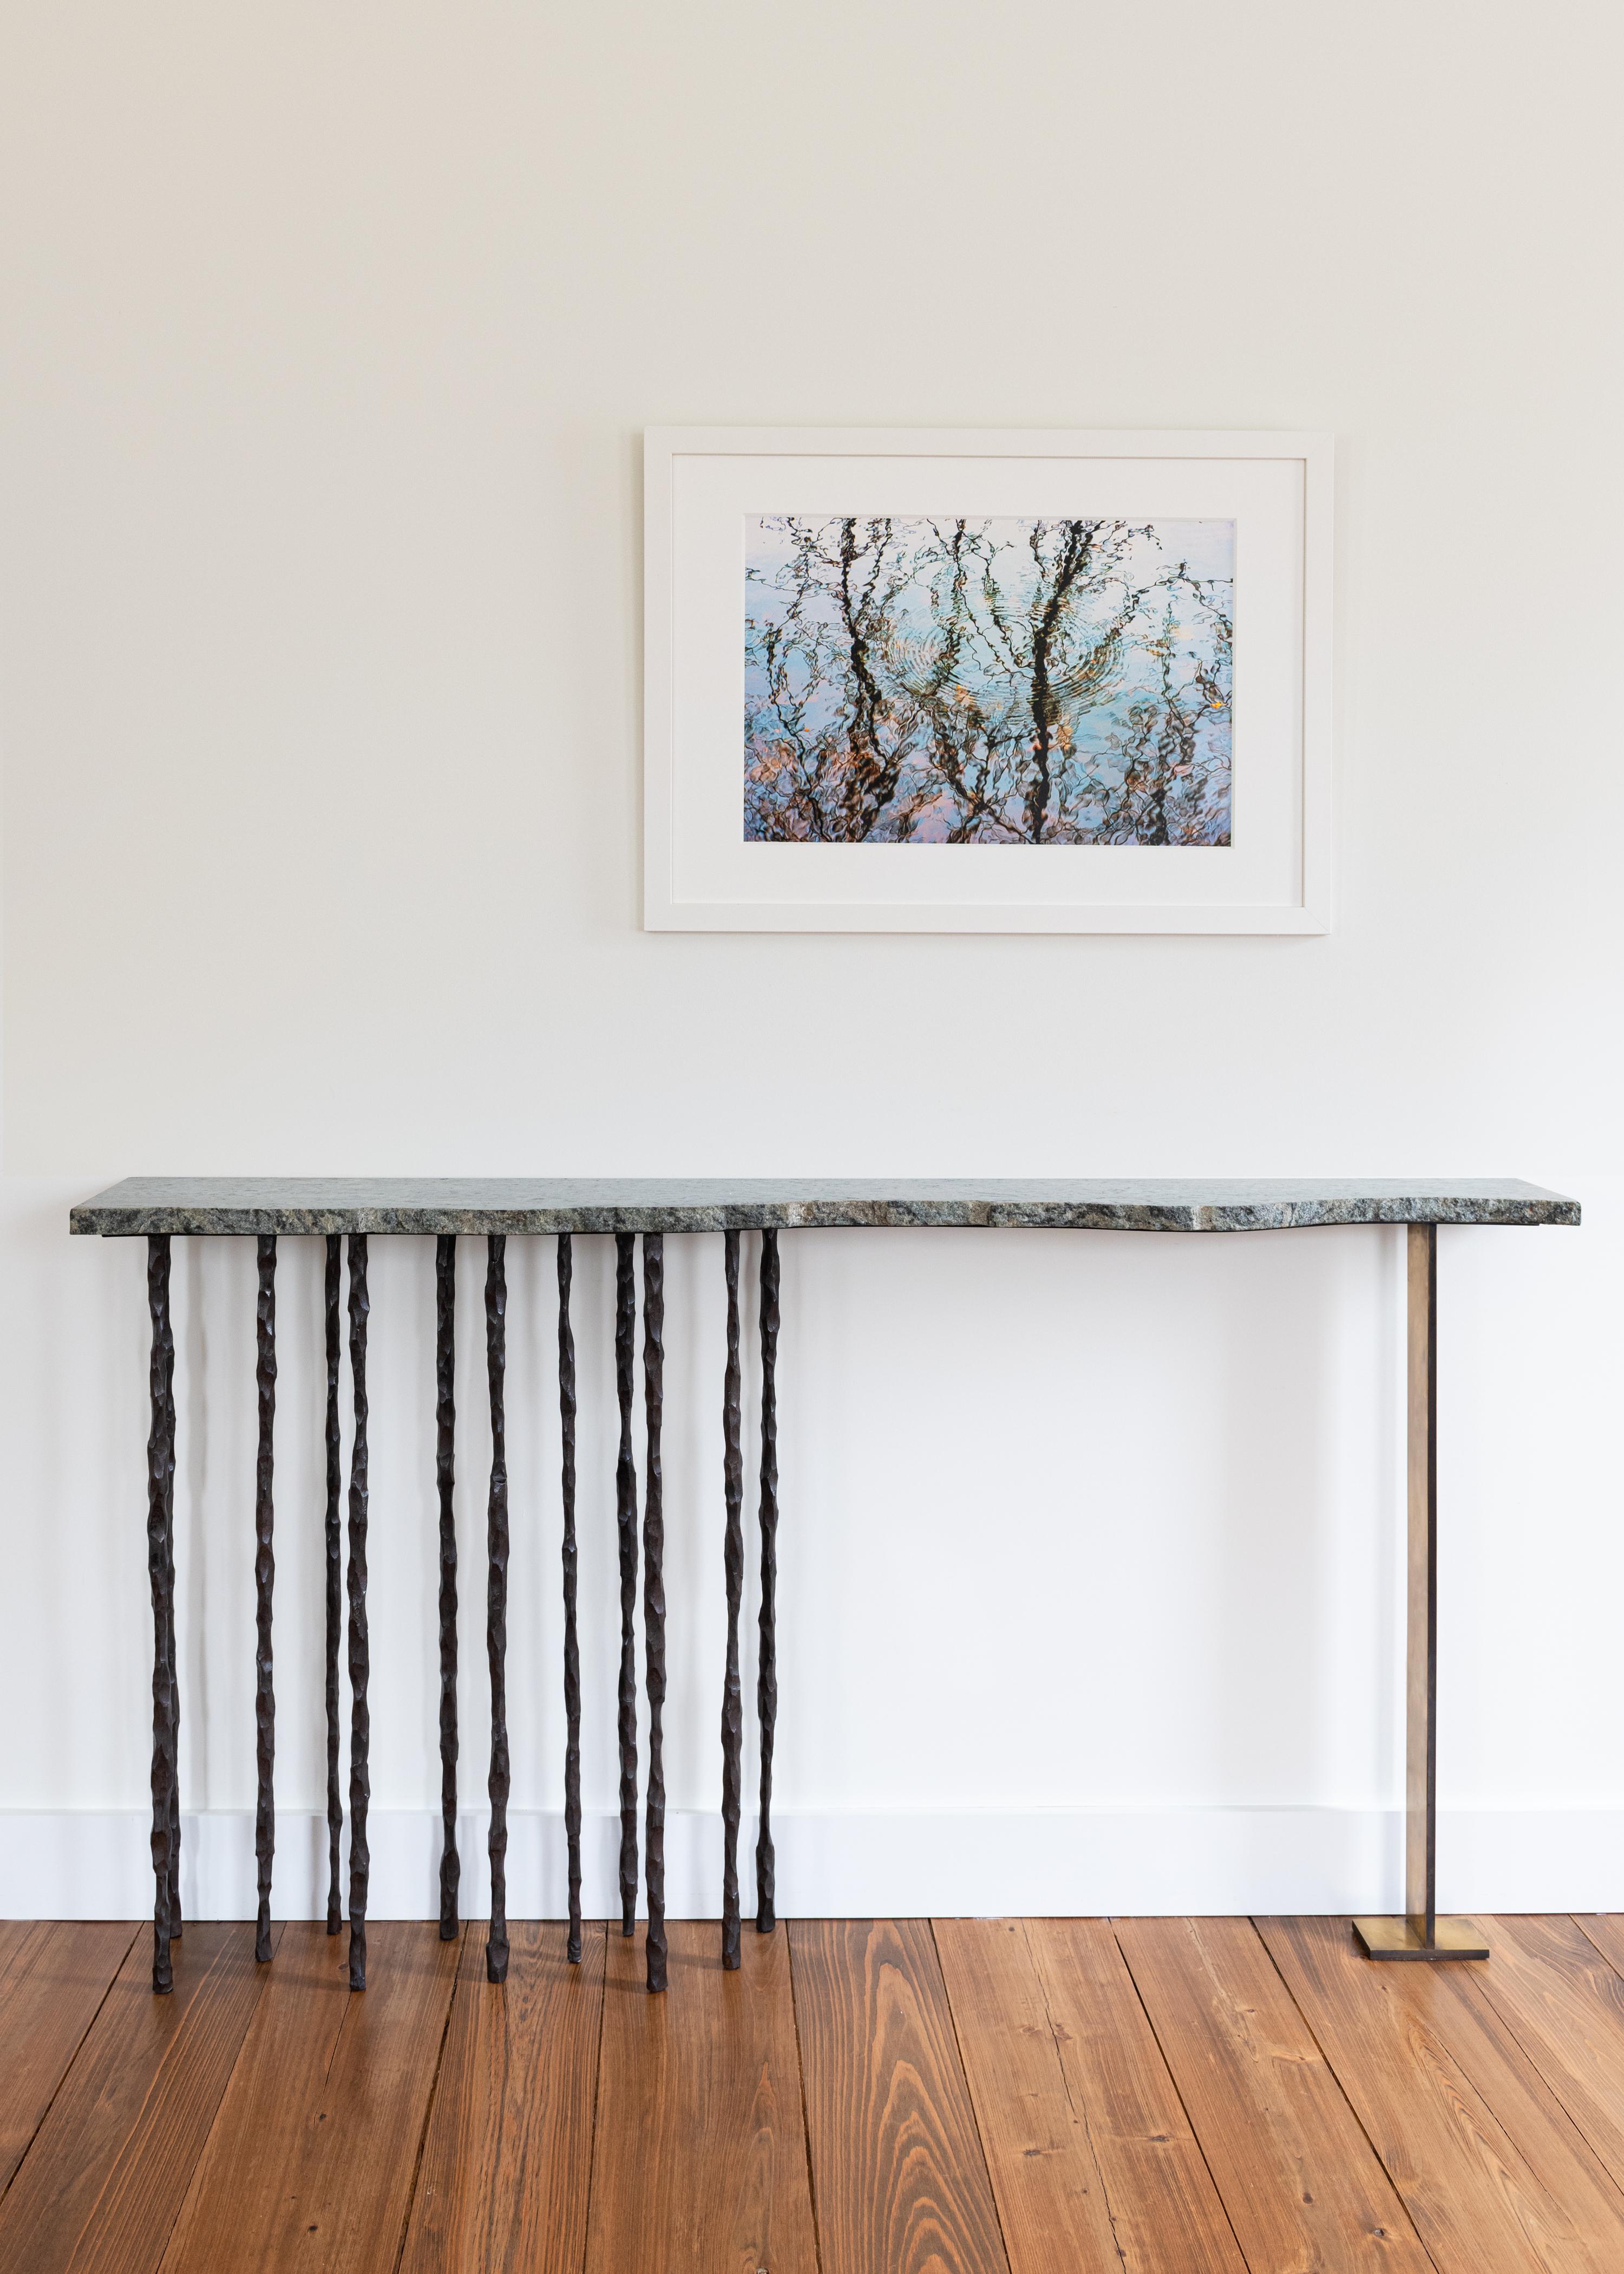 One of a kind handcrafted artisan sculptural console. Melding a unique stone slab with individually wrought and textured iron legs, this Stand alone piece of art has both strength and delicacy. By adding a rectangular brass leg with patina to the